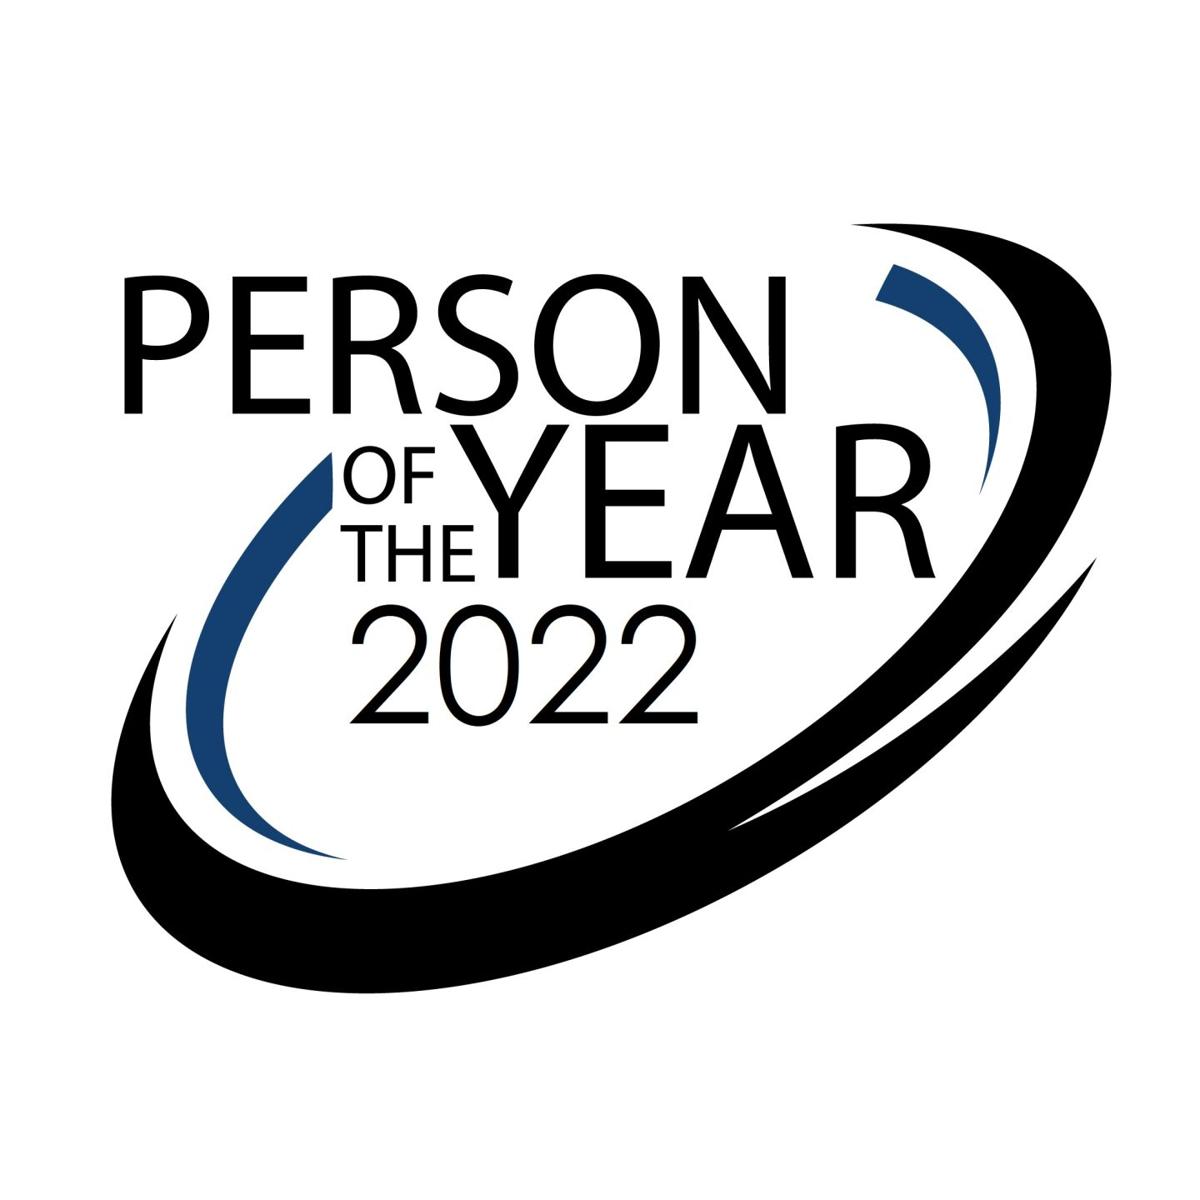 Person of Year